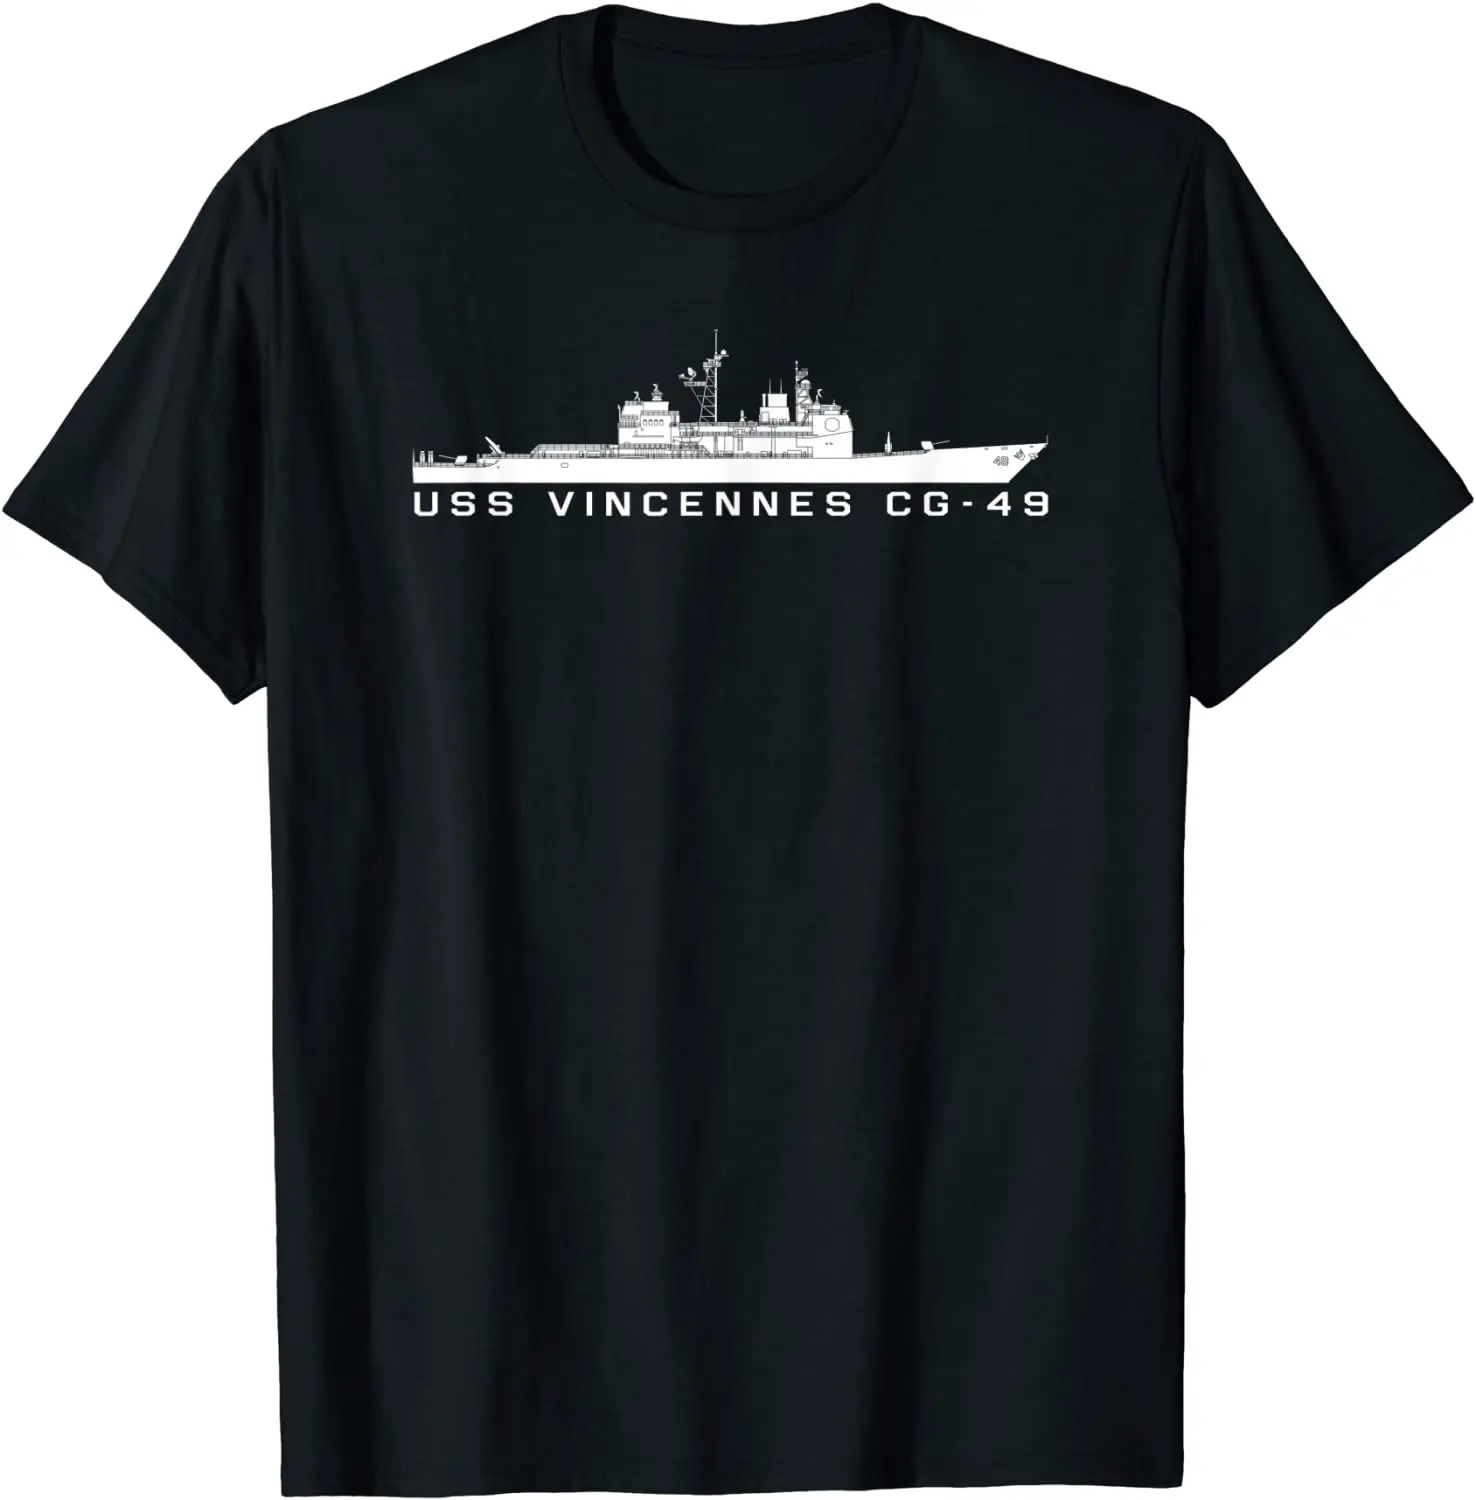 

USS Vincennes CG-49 Guided Missile Cruiser Silhouette T Shirt. Short Sleeve 100% Cotton Casual T-shirts Loose Top Size S-3XL